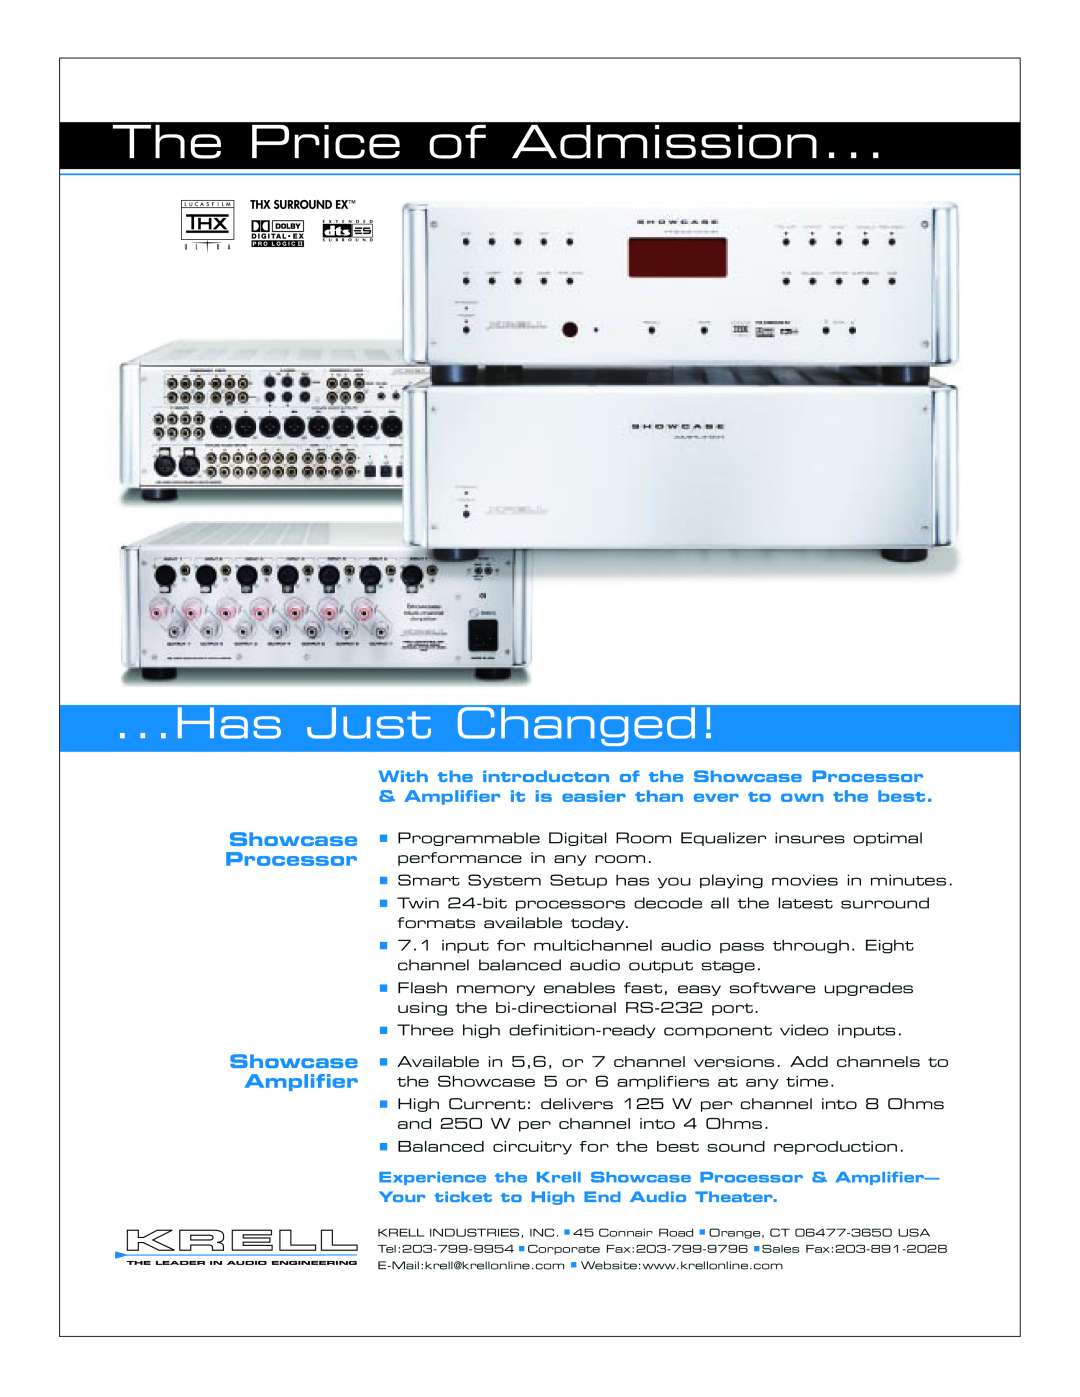 Krell Industries Showcase Processor & Amplifier manual The Price of Admission, Has Just Changed 